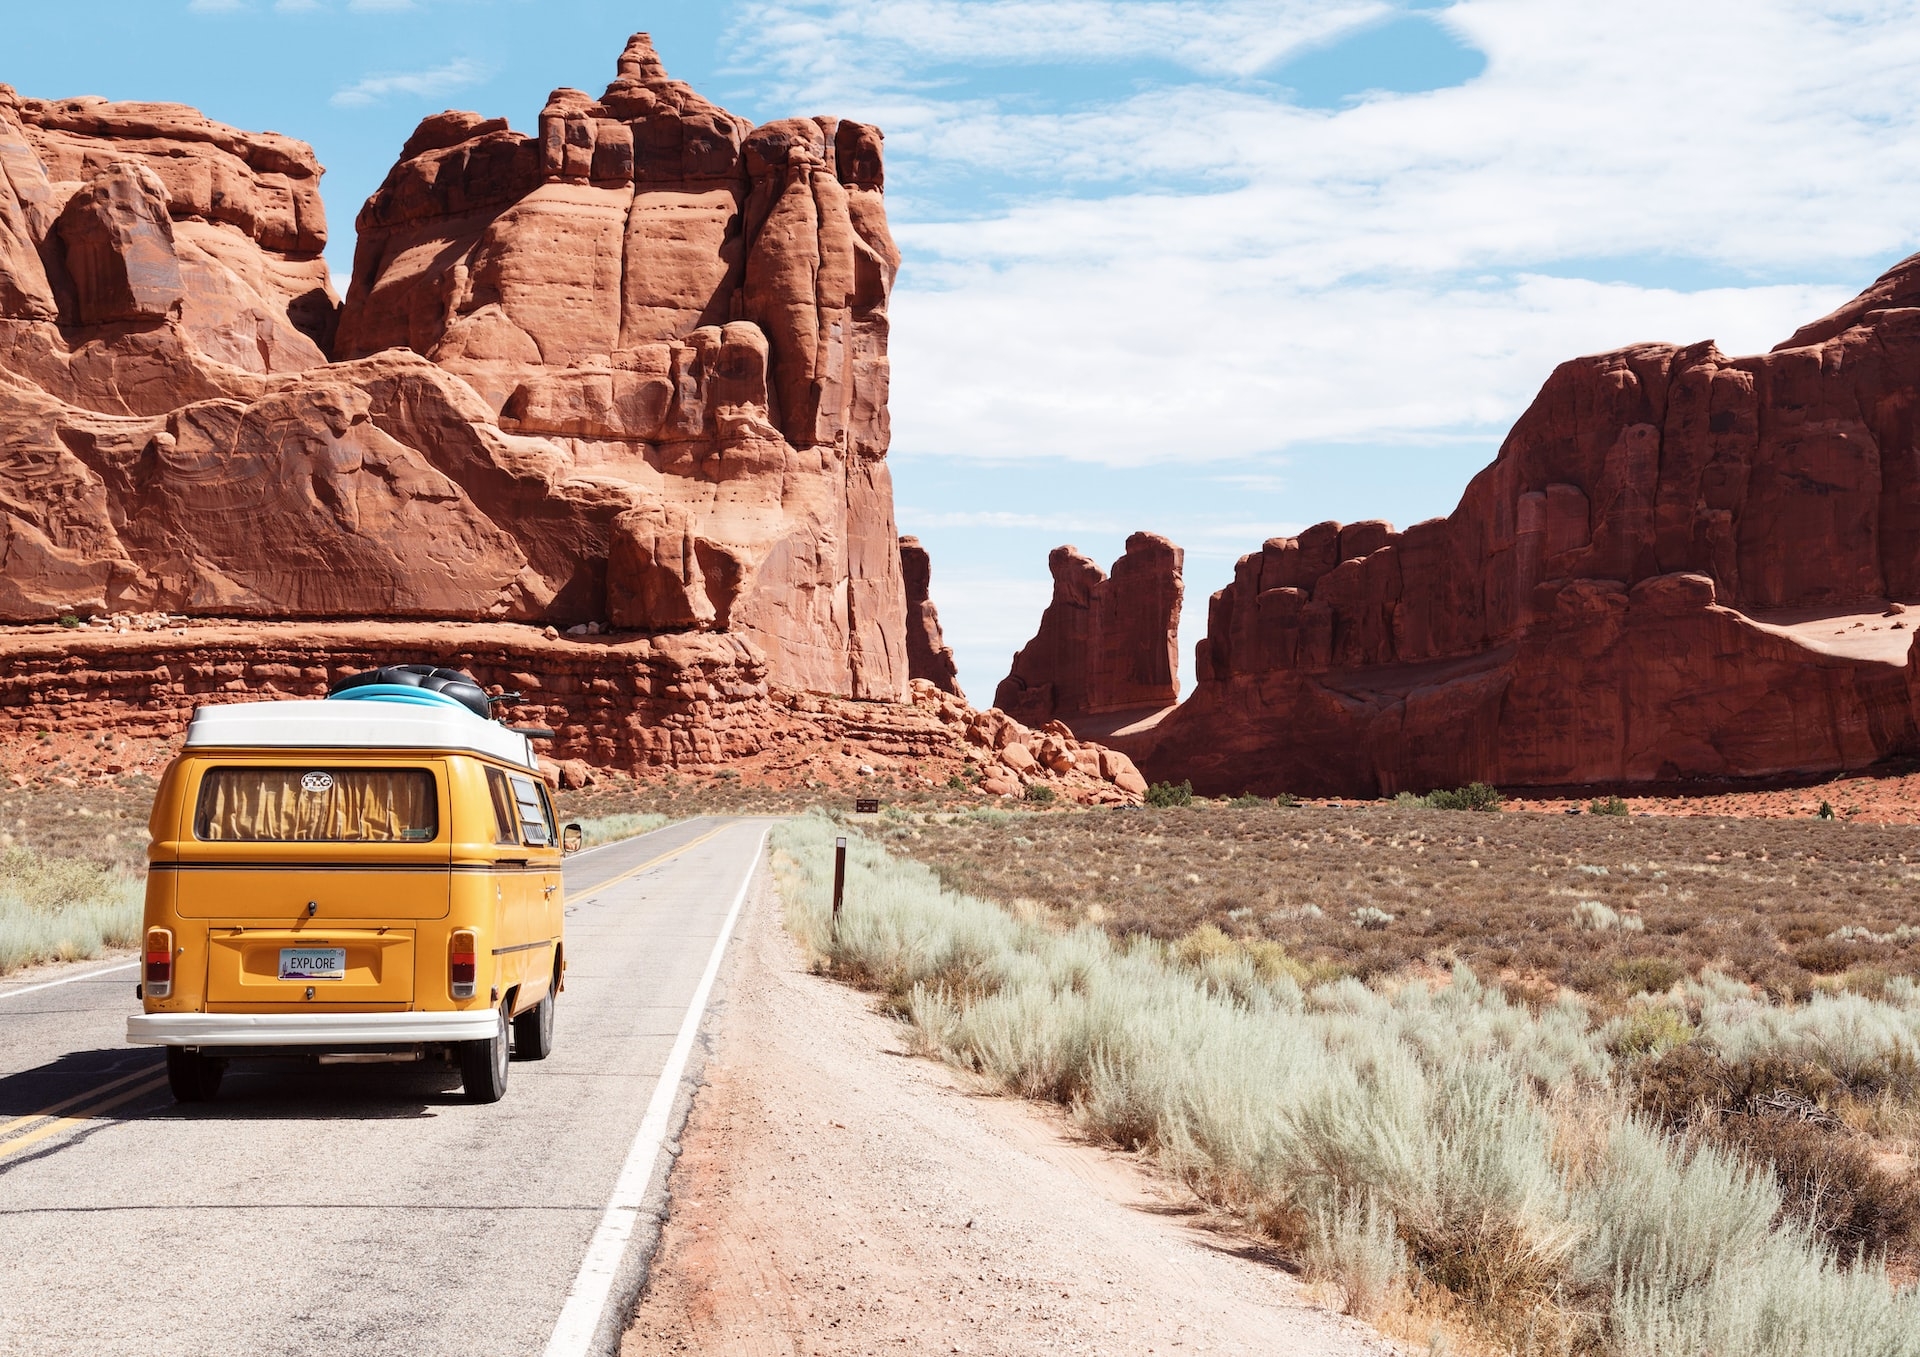 How to Use a Weather App to Plan the Perfect Road Trip